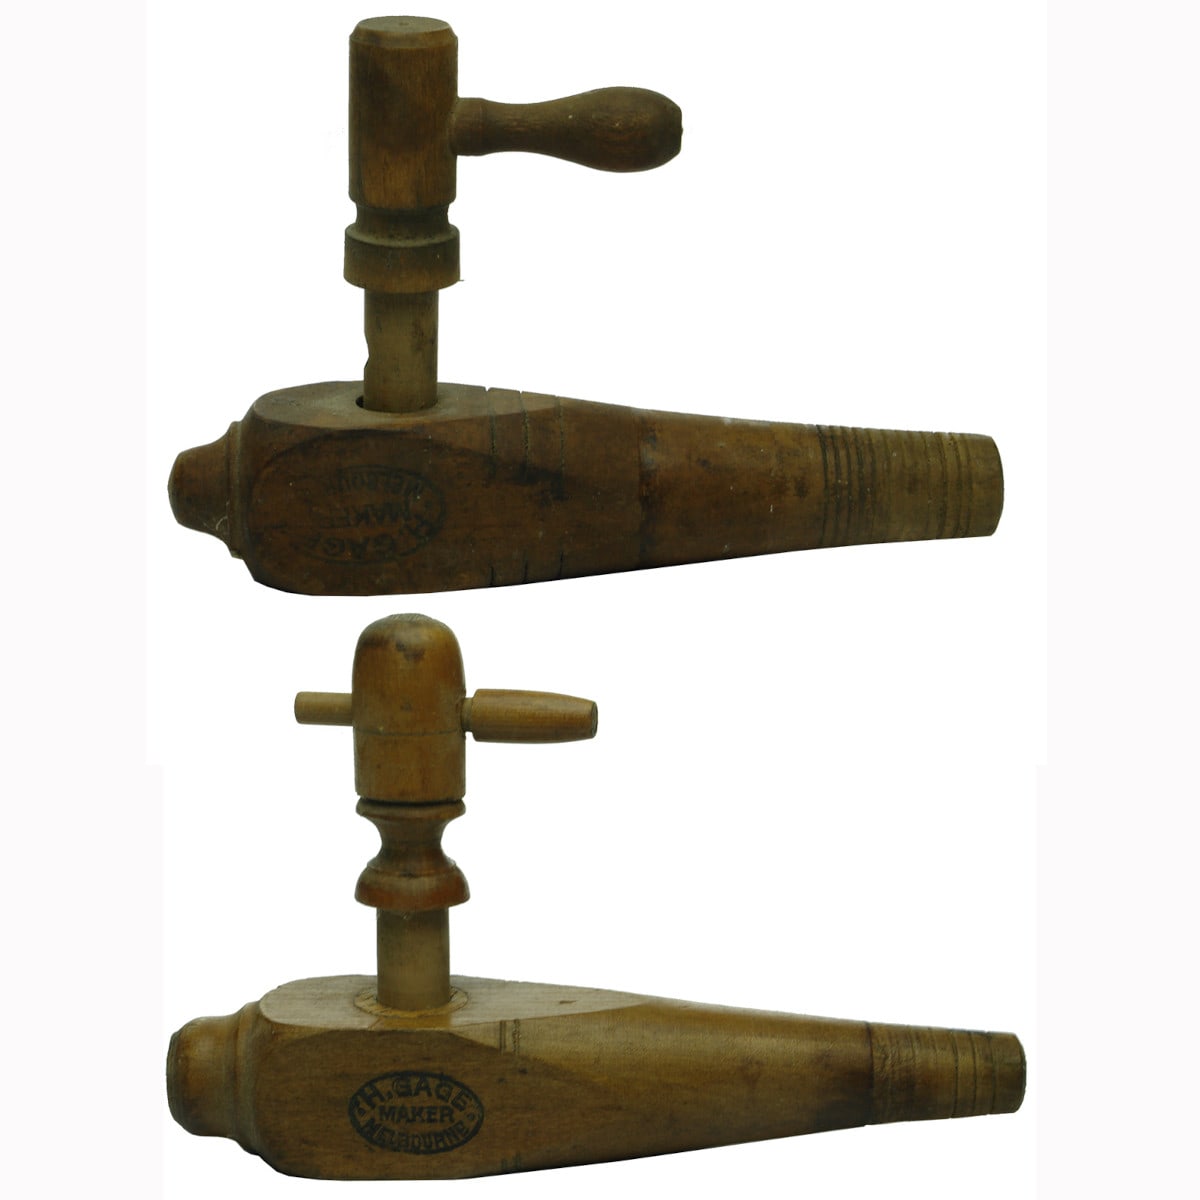 Pair of Gage Melbourne Wooden Barrel Taps. Size 1 and 2.